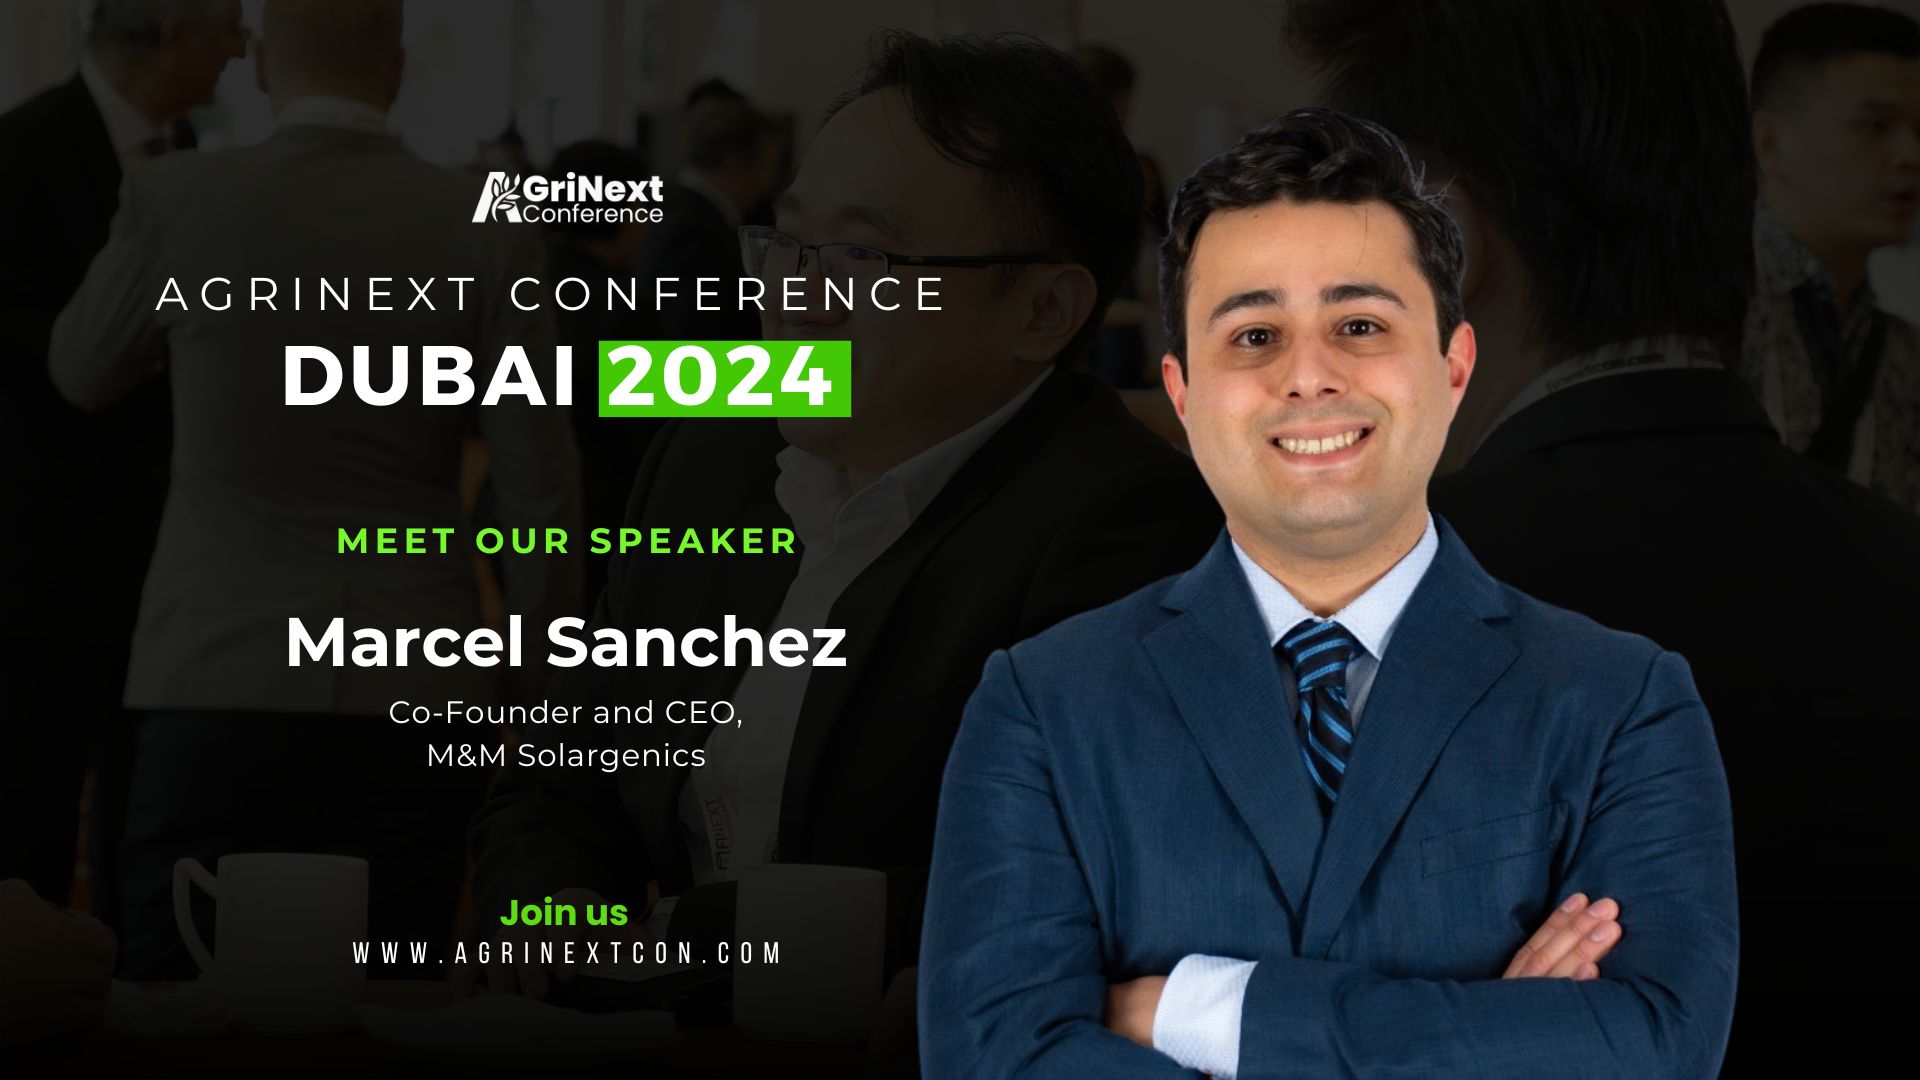 Marcel Sanchez, Co-Founder and CEO of M&M Solargenics, to Speak at AgriNext Conference in Dubai